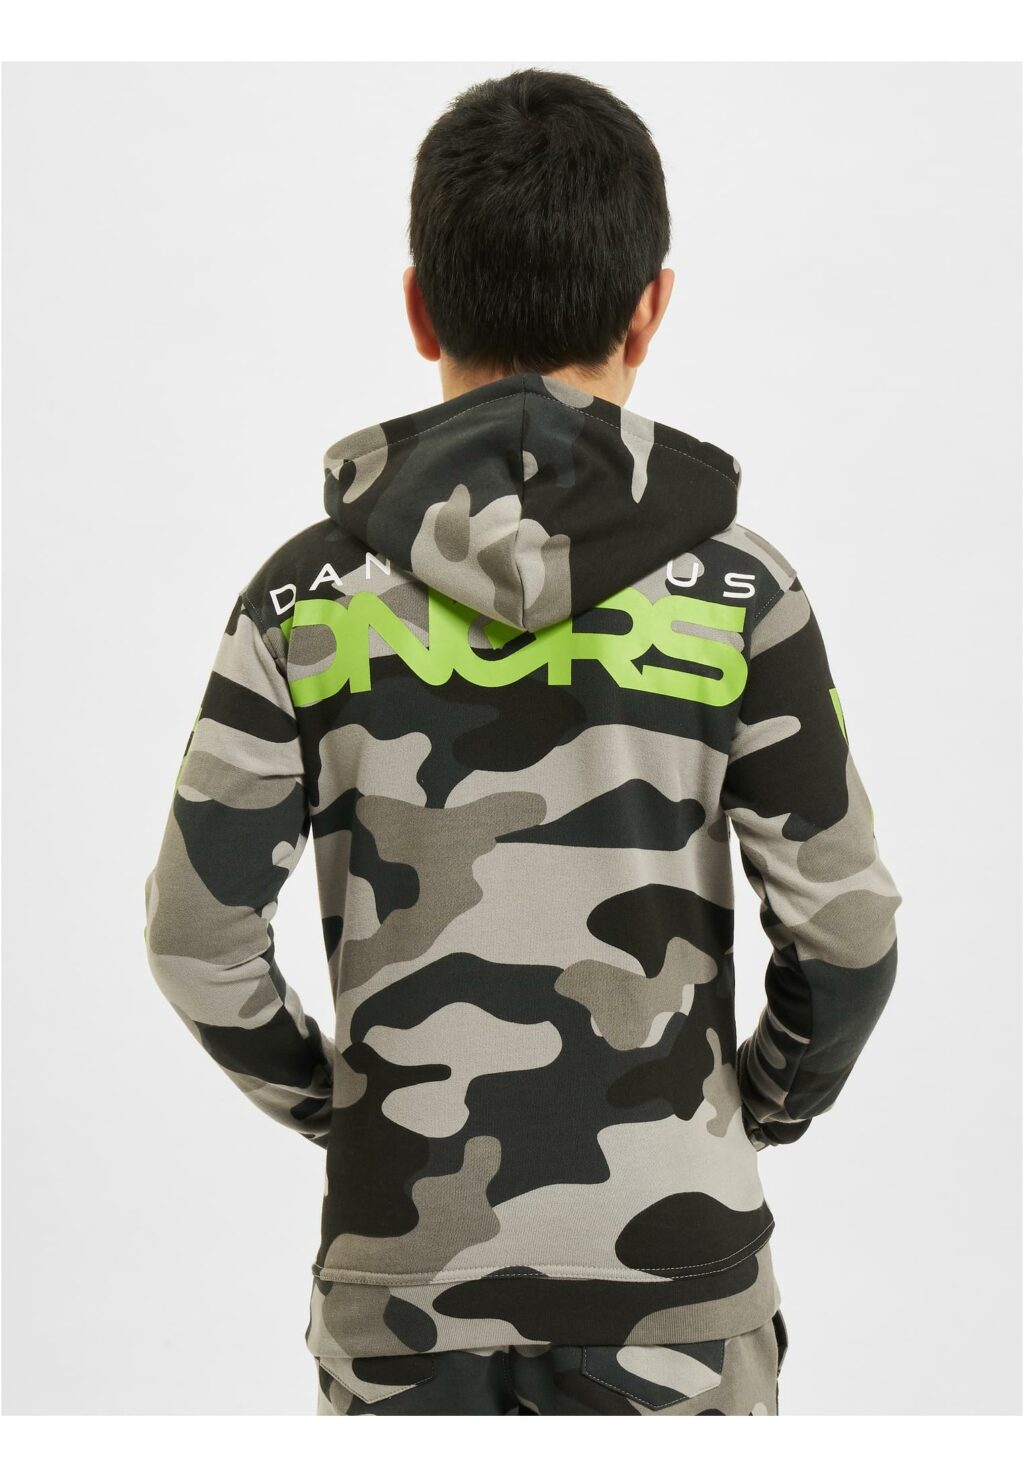 Classic Kids Hoody camouflage DKHD030